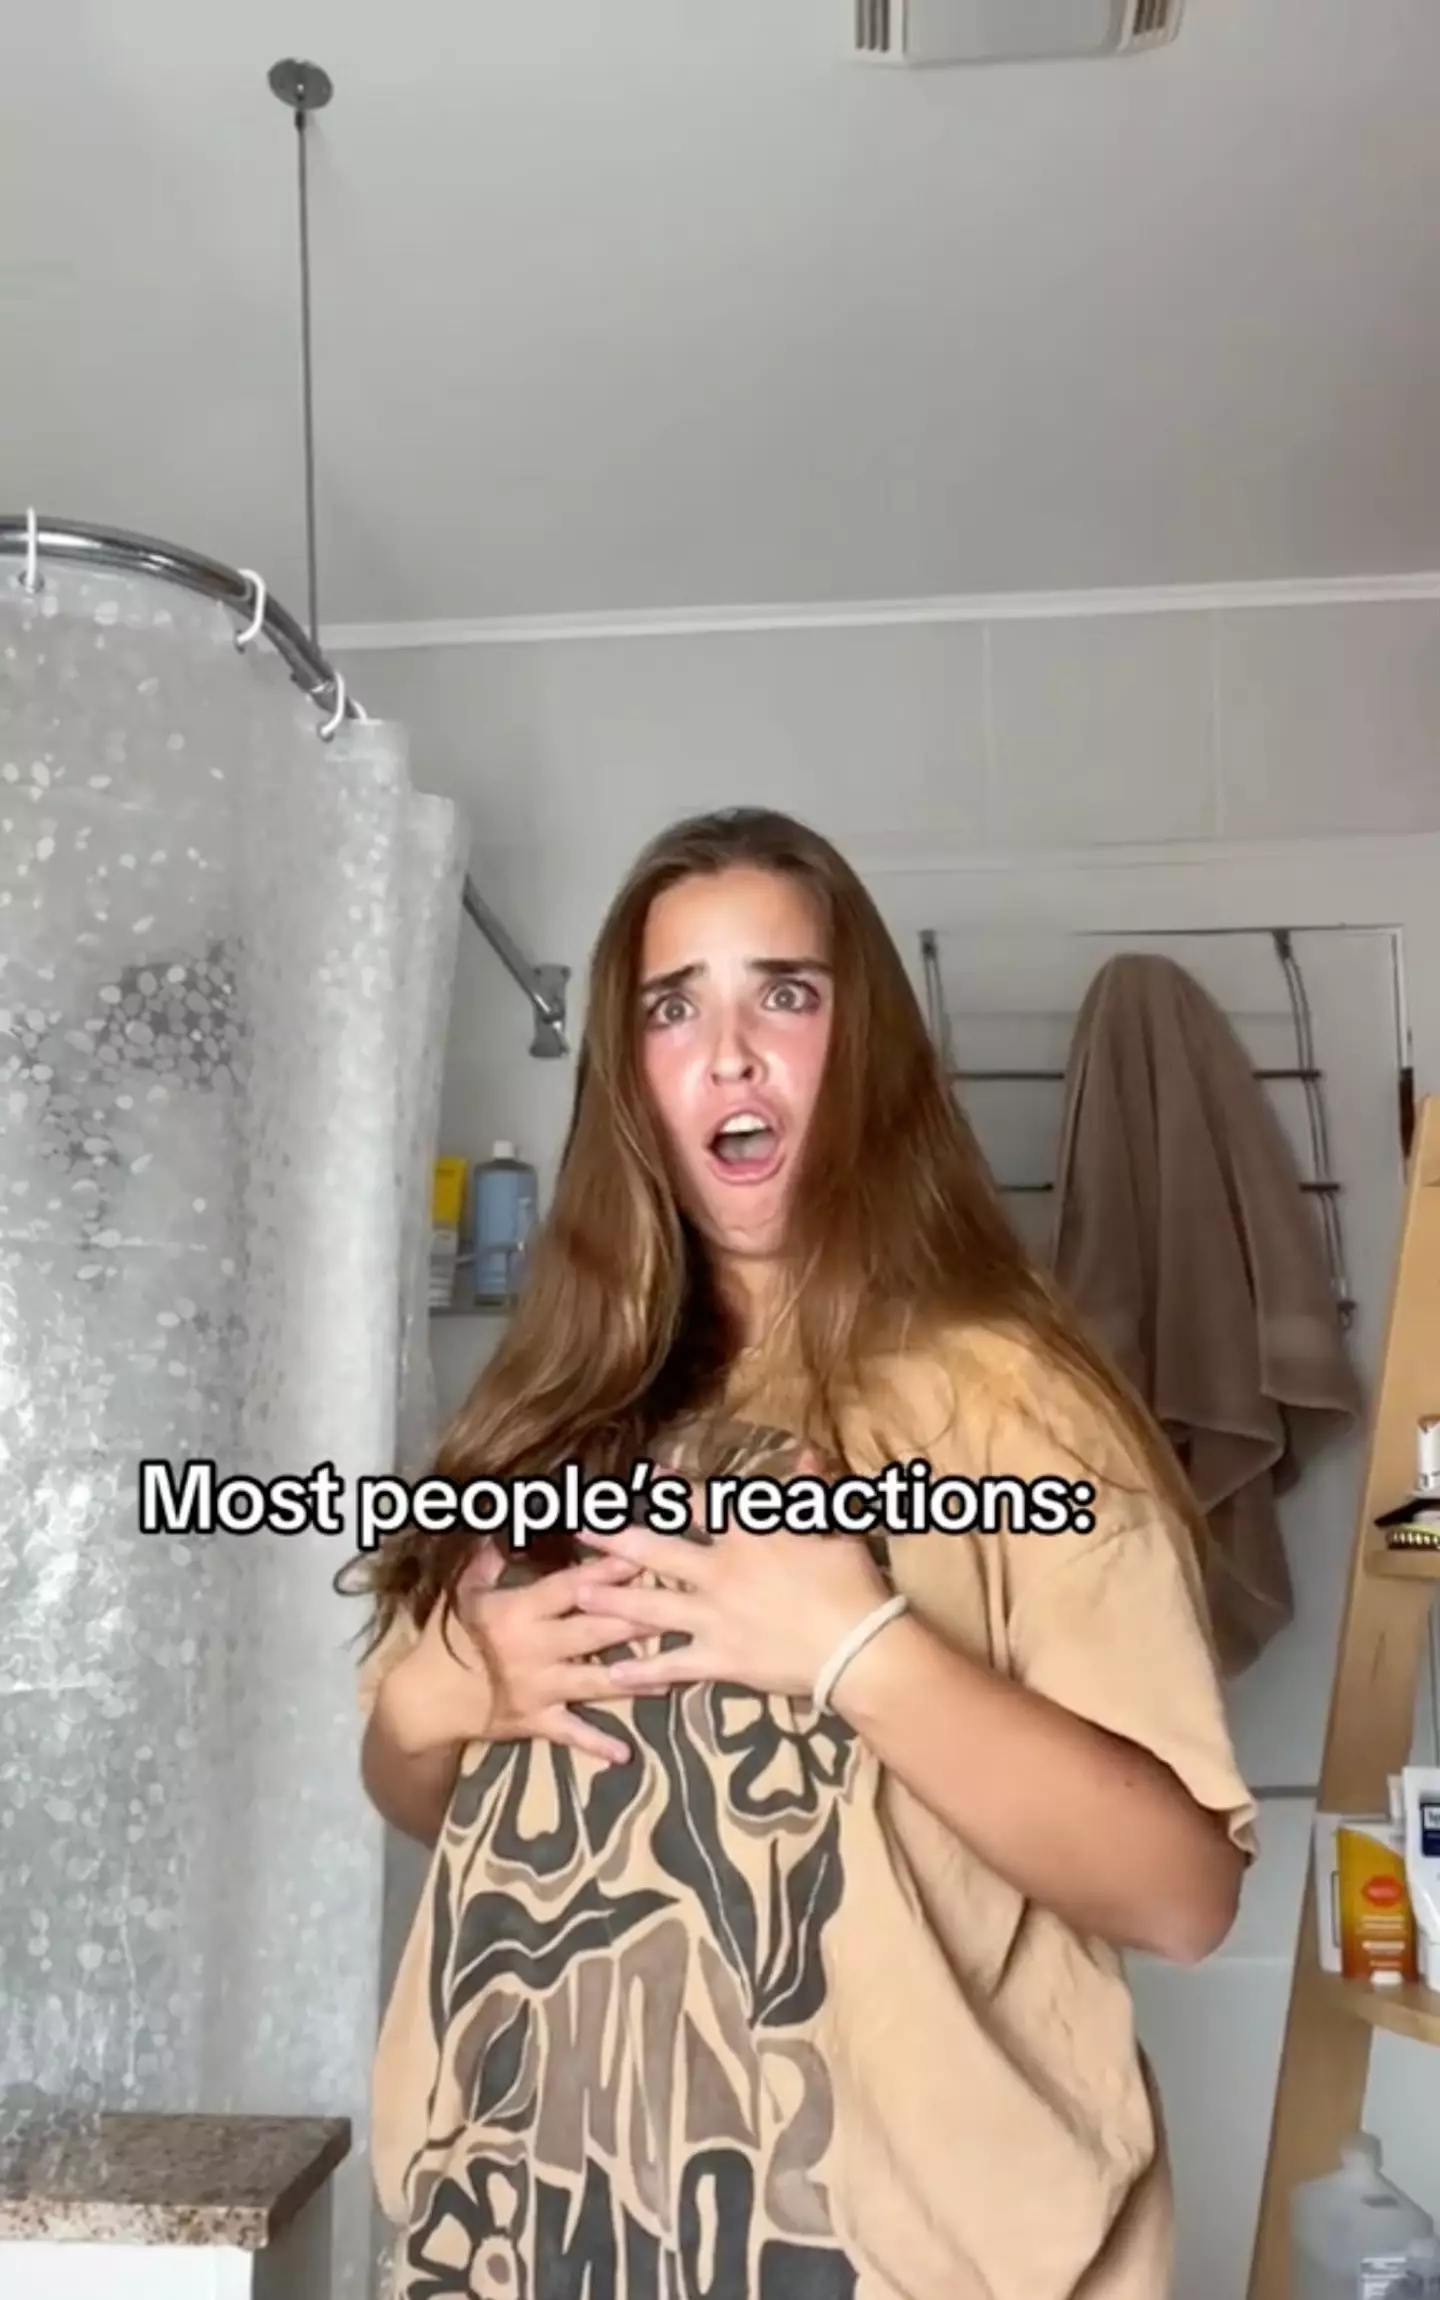 The 21-year-old said she is used to people being shocked by her bathroom habits.